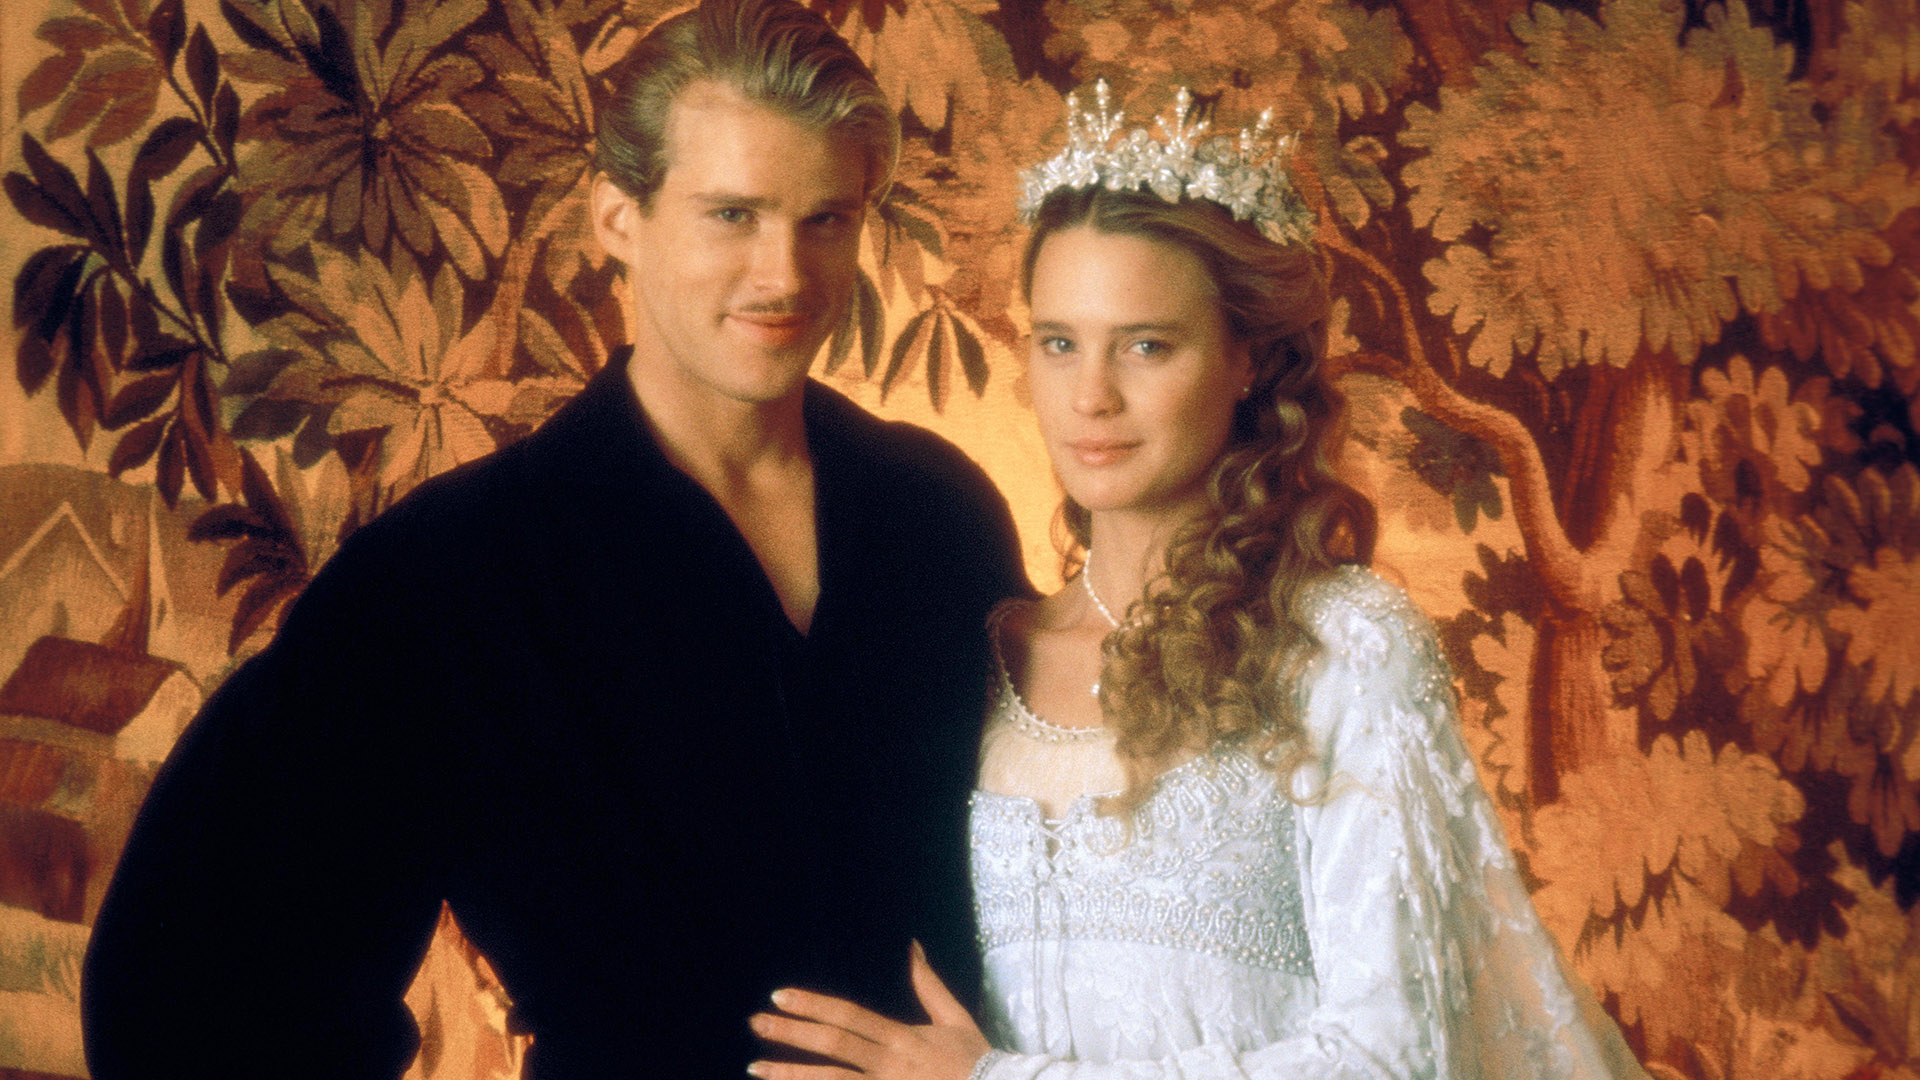 Princess Bride's Cary Elwes Delivers Flawless Response to Remake Buzz